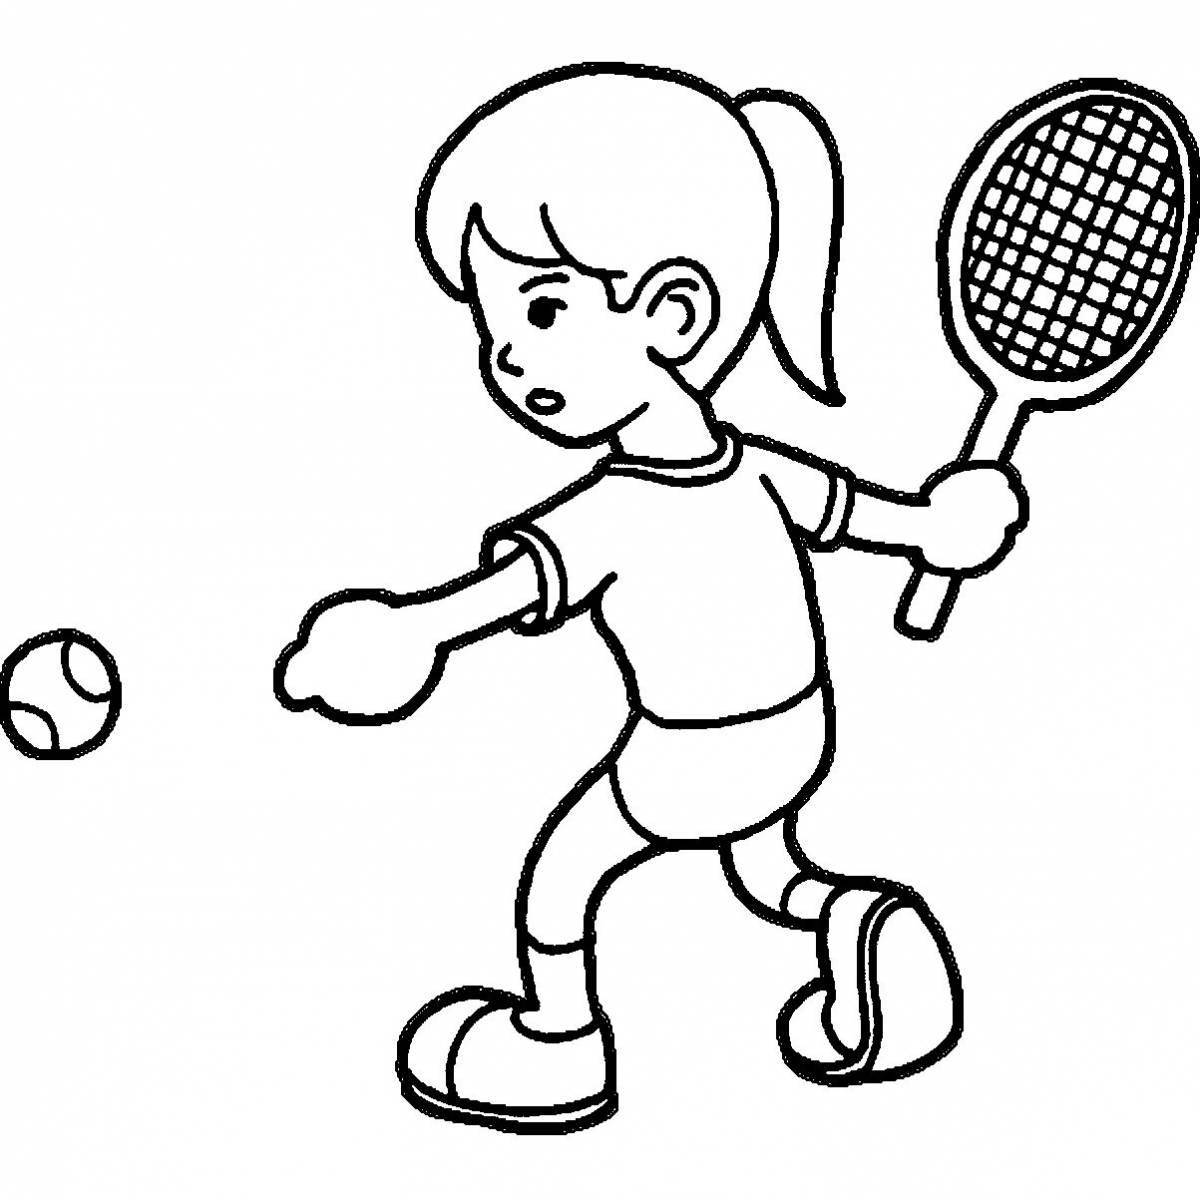 A fun sports coloring book for kids